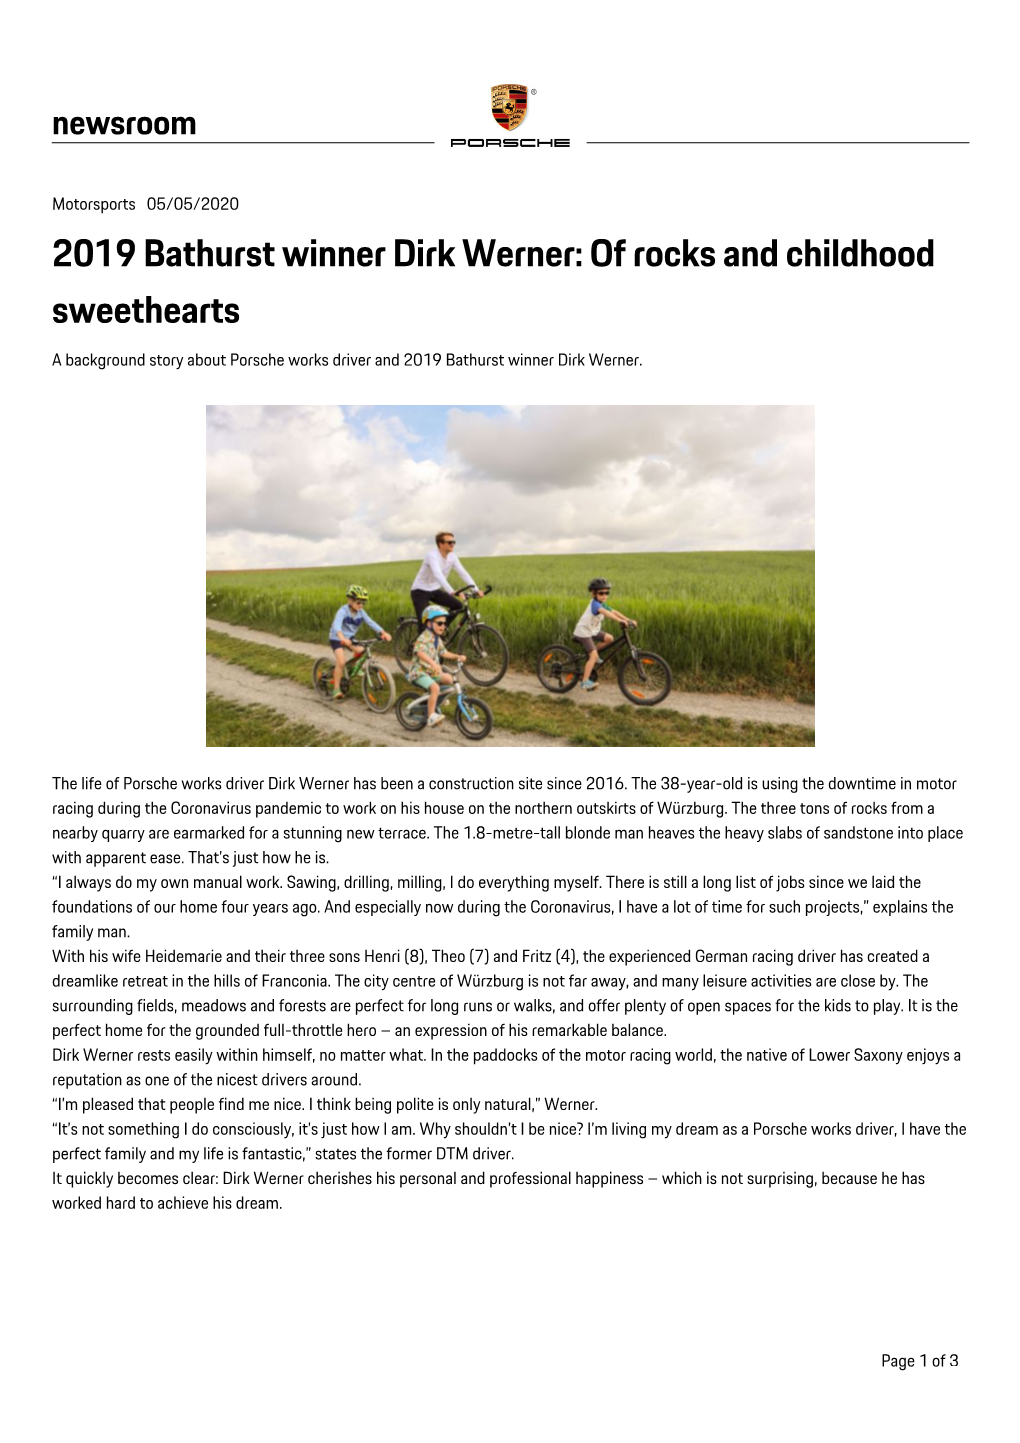 2019 Bathurst Winner Dirk Werner: of Rocks and Childhood Sweethearts a Background Story About Porsche Works Driver and 2019 Bathurst Winner Dirk Werner